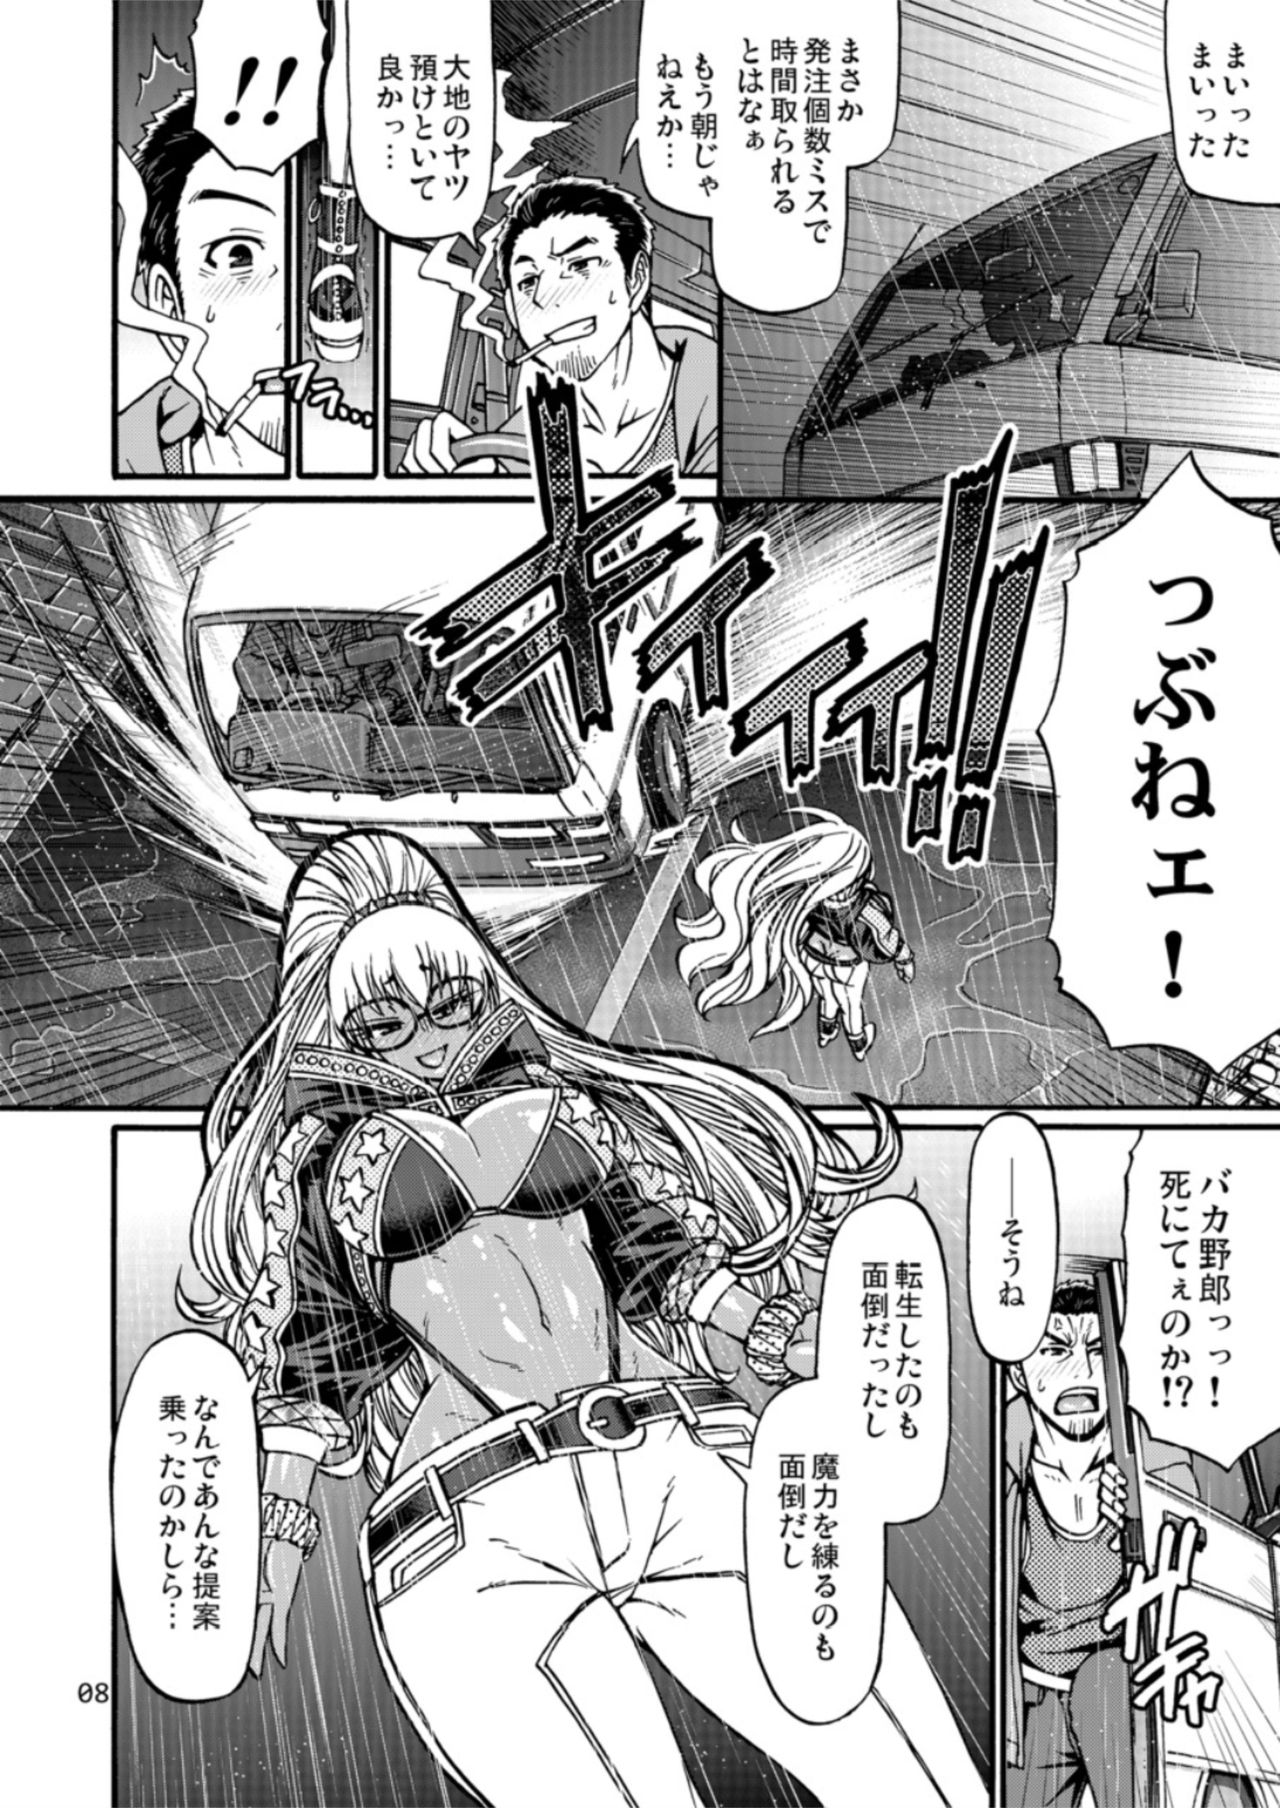 [CELLULOID-ACME (Chiba Toshirou)] Black Witches 2 [Digital] page 7 full